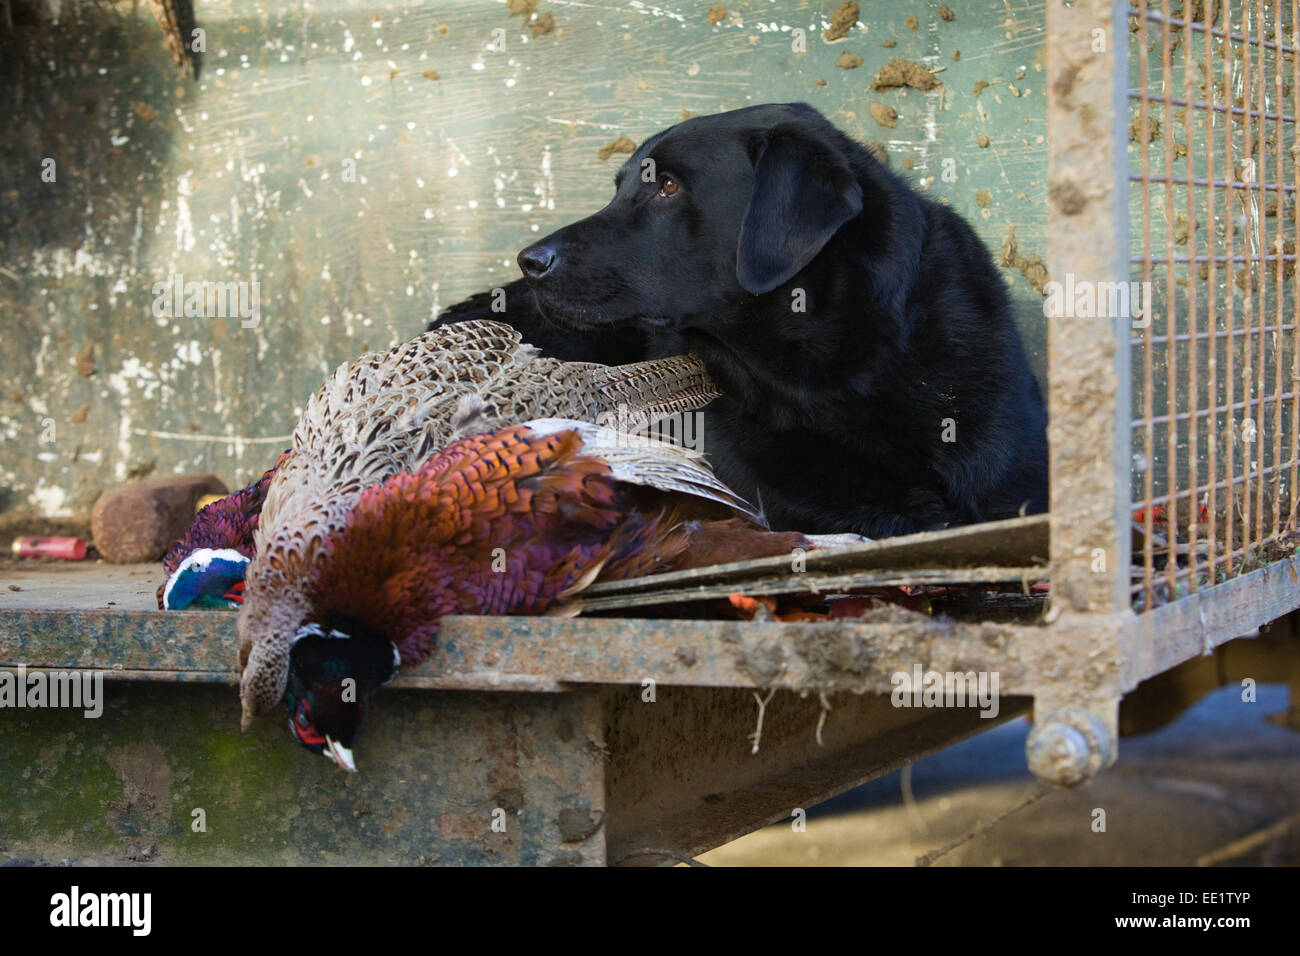 A Black Labrador Retriever working dog laying down with dead pheasants on a shoot in England, UK Stock Photo